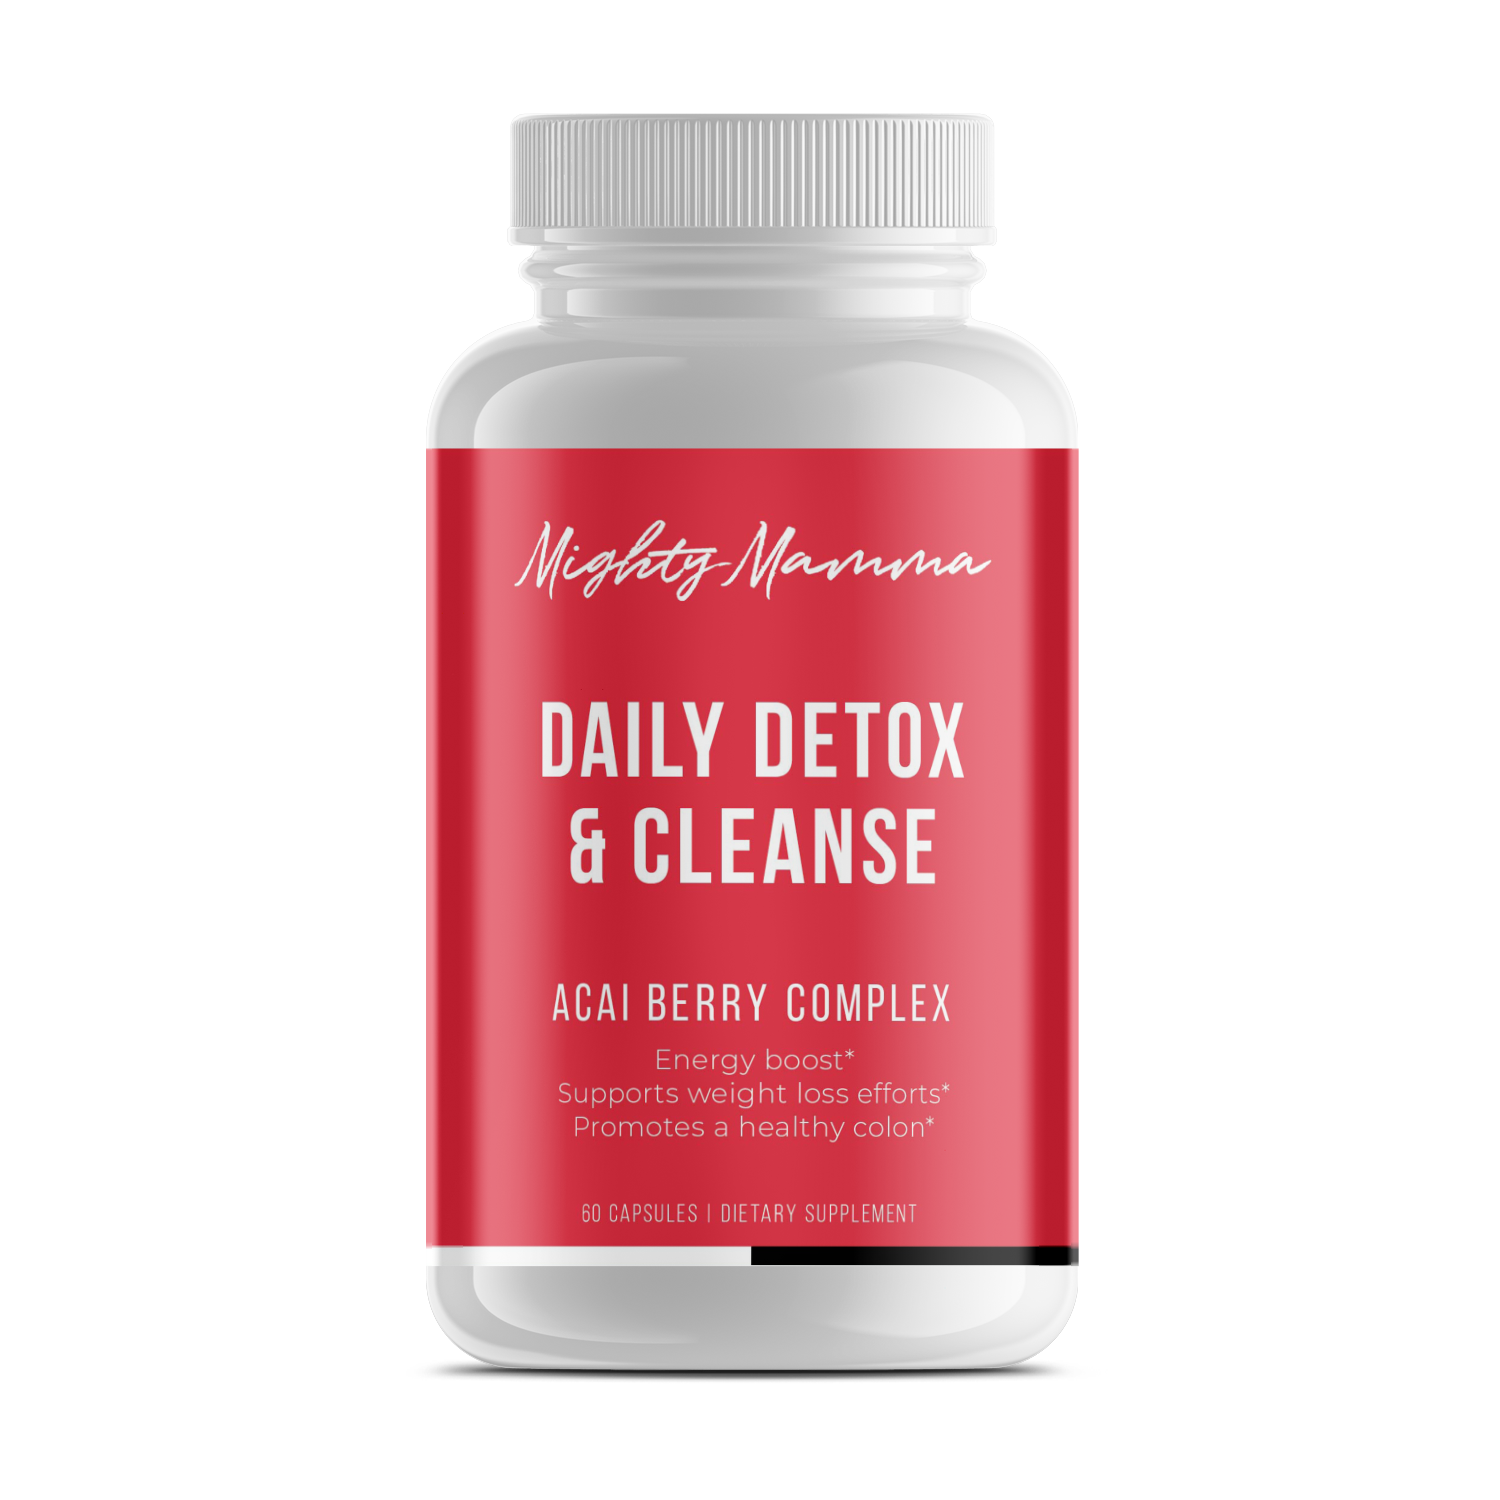 DAILY DETOX & CLEANSE